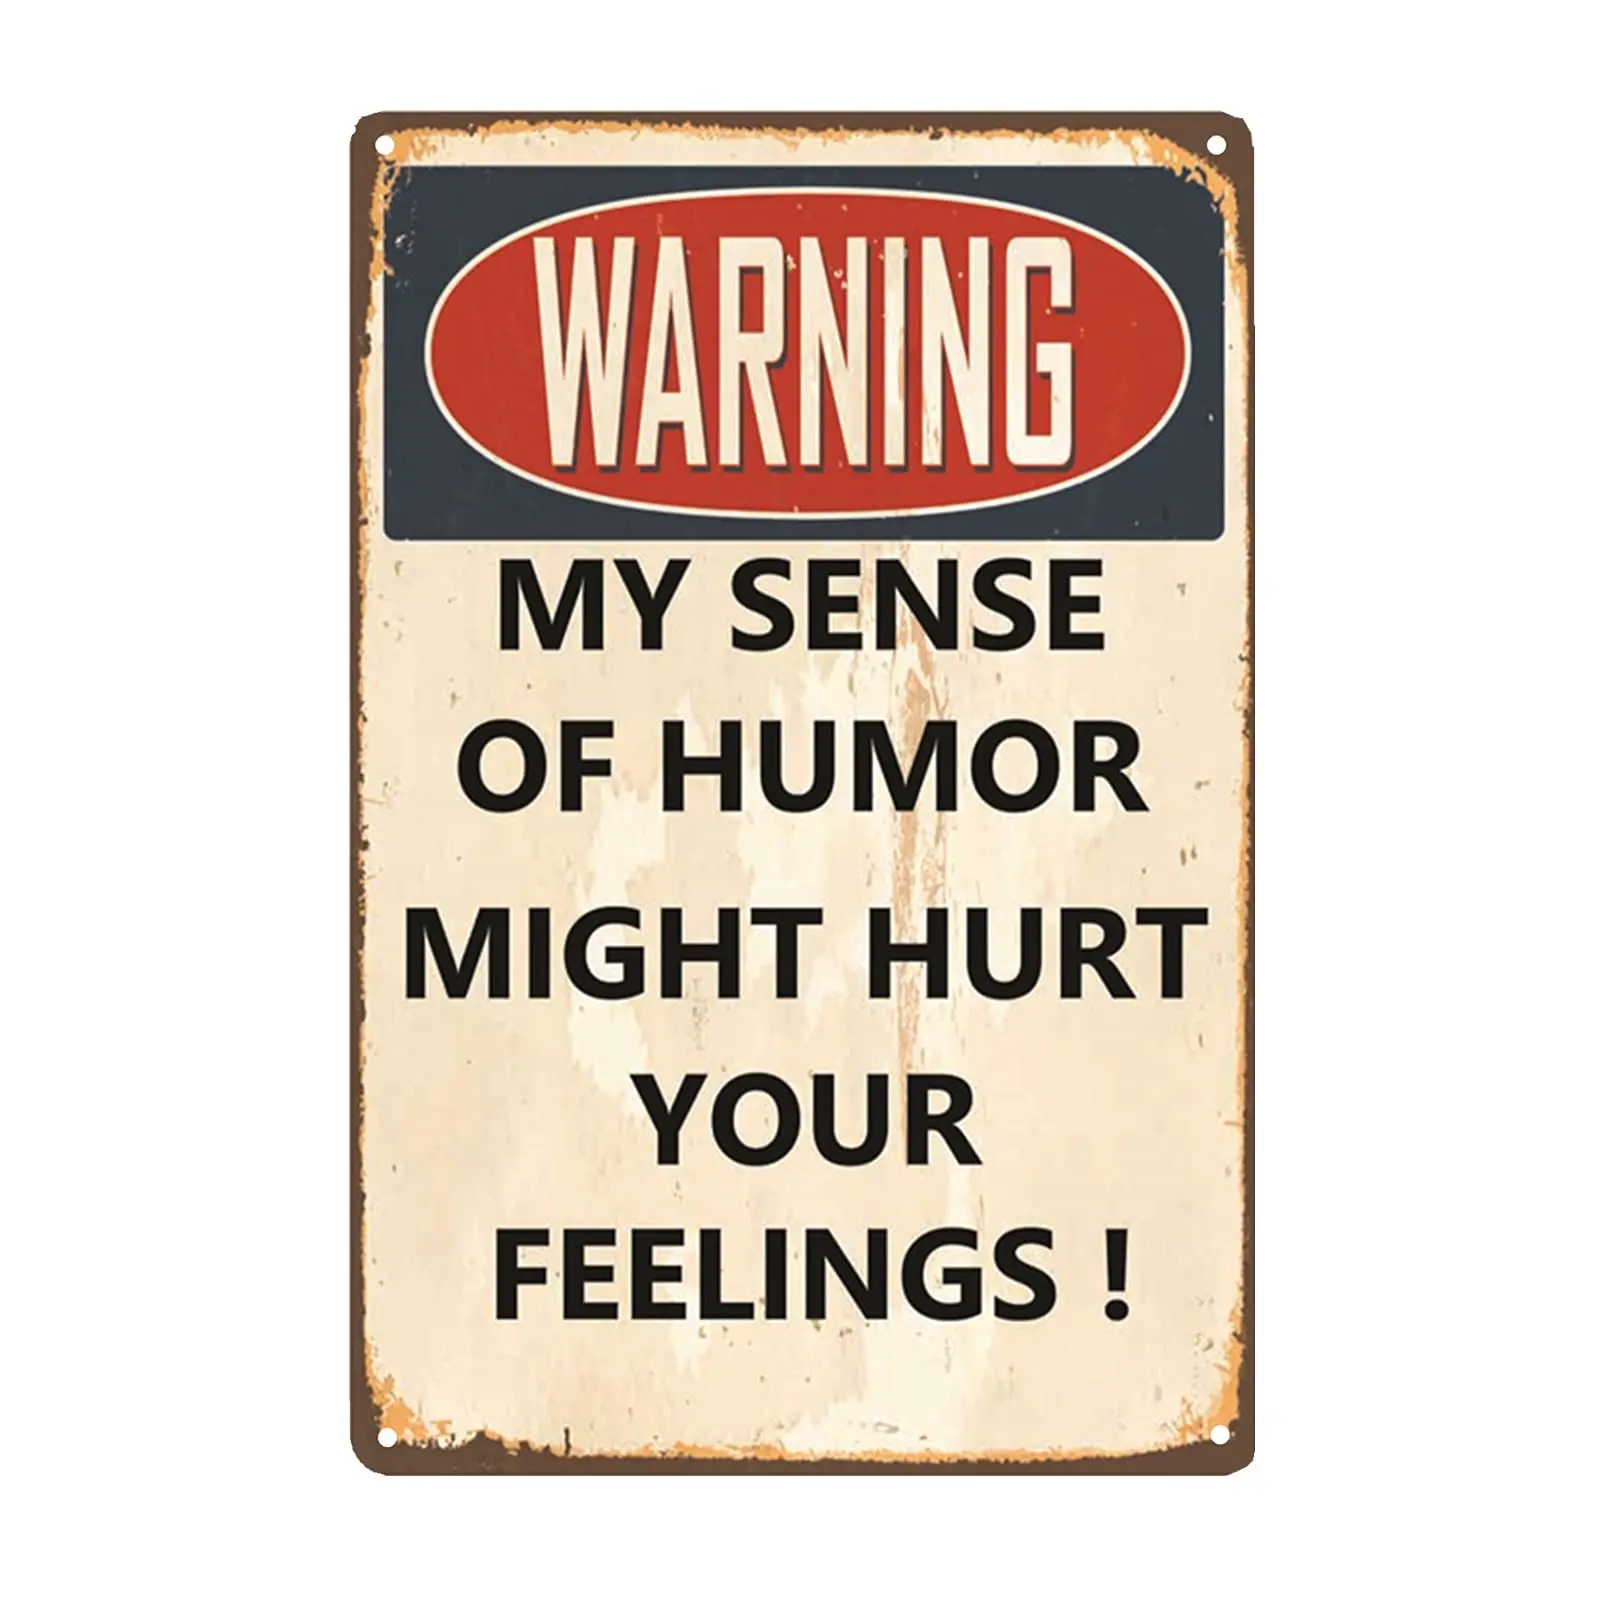 

Man Cave Bar Personalized Signs Home Sign Wall Decor Cool Stuff For Men Warning My Sense Of Humor Might Hurt Your Feelings